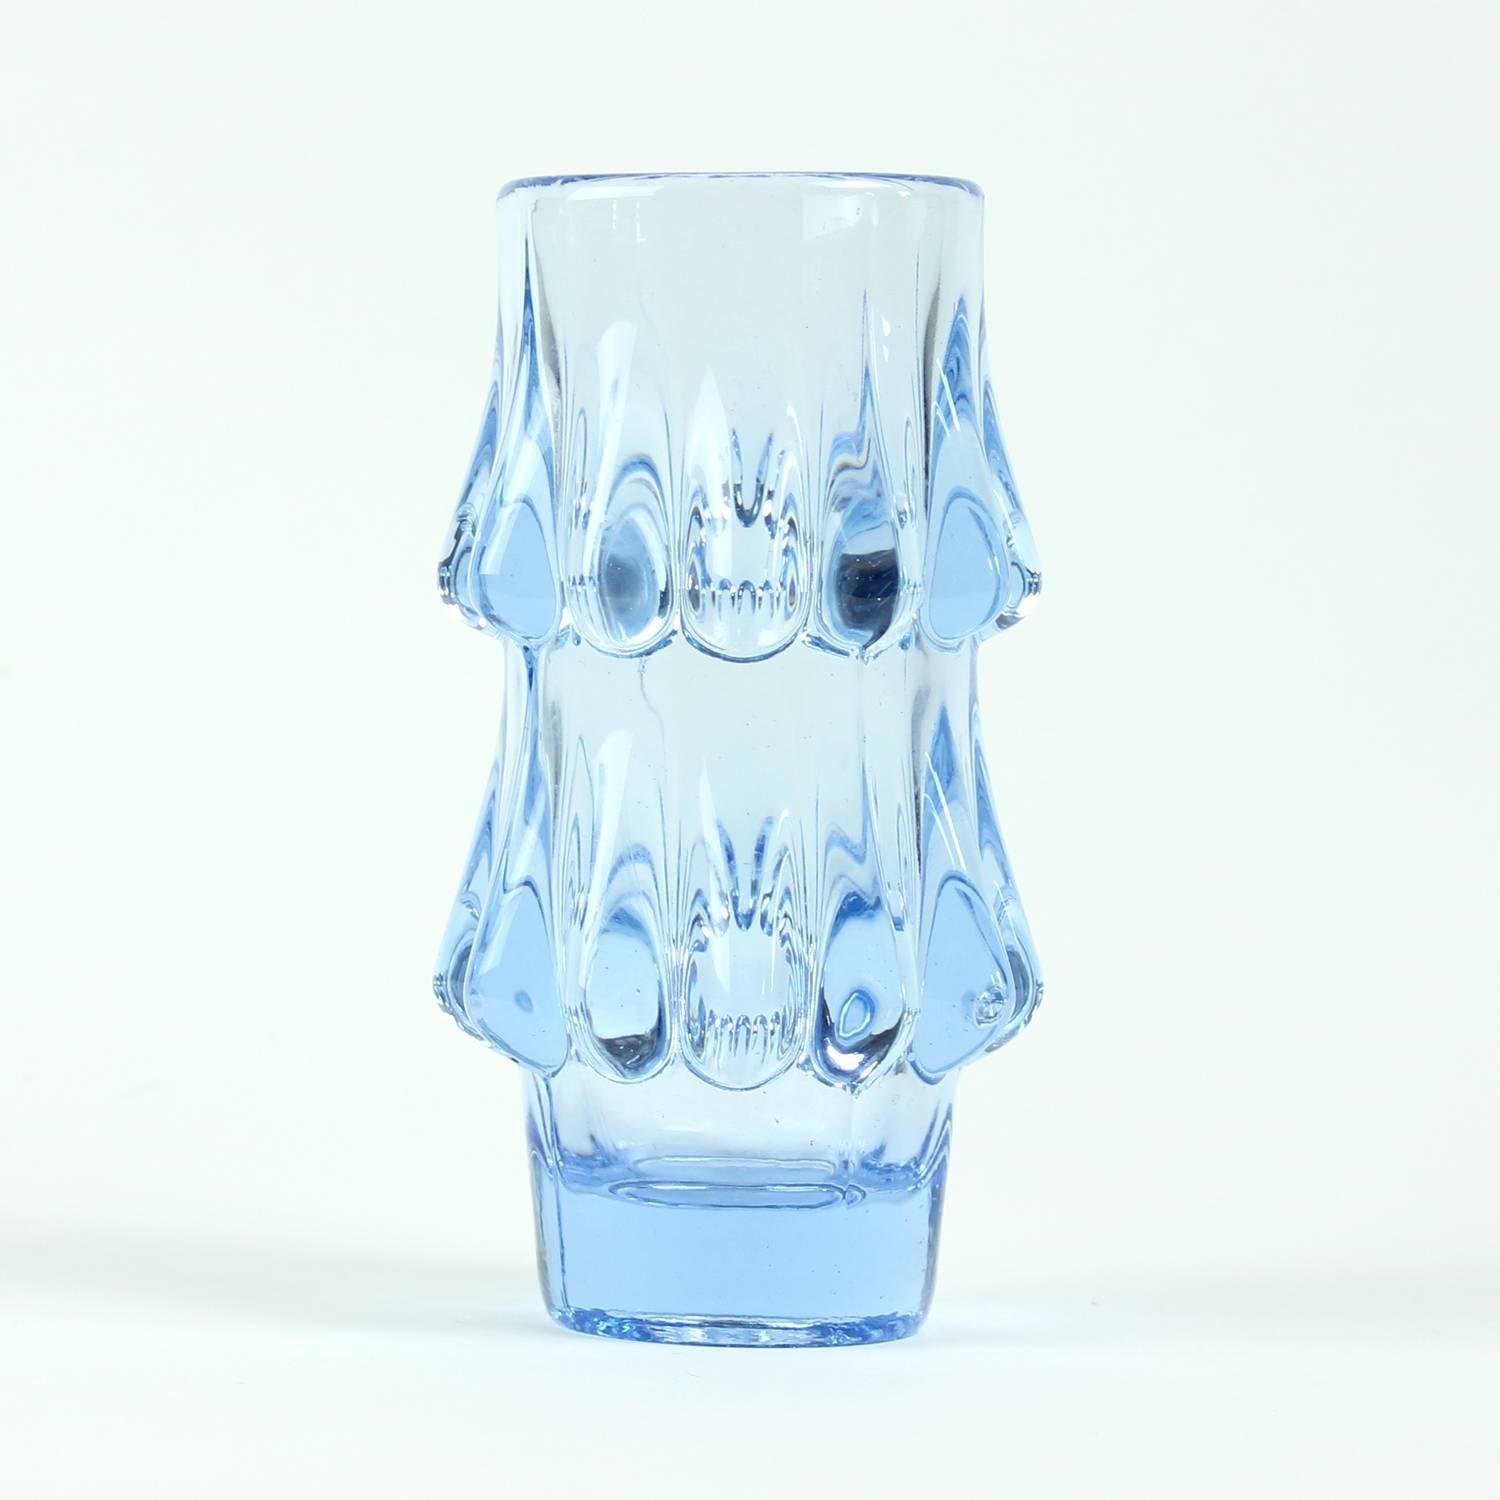 Rare and unique art glass vases in beautiful pink and light blue glass. Designed by Jiri Brabec for Sklo Unior Rosice in 1978. The model was originally named Model 5201/15. Brabec is considered to be a master in Czech glass tradition, as he uses the